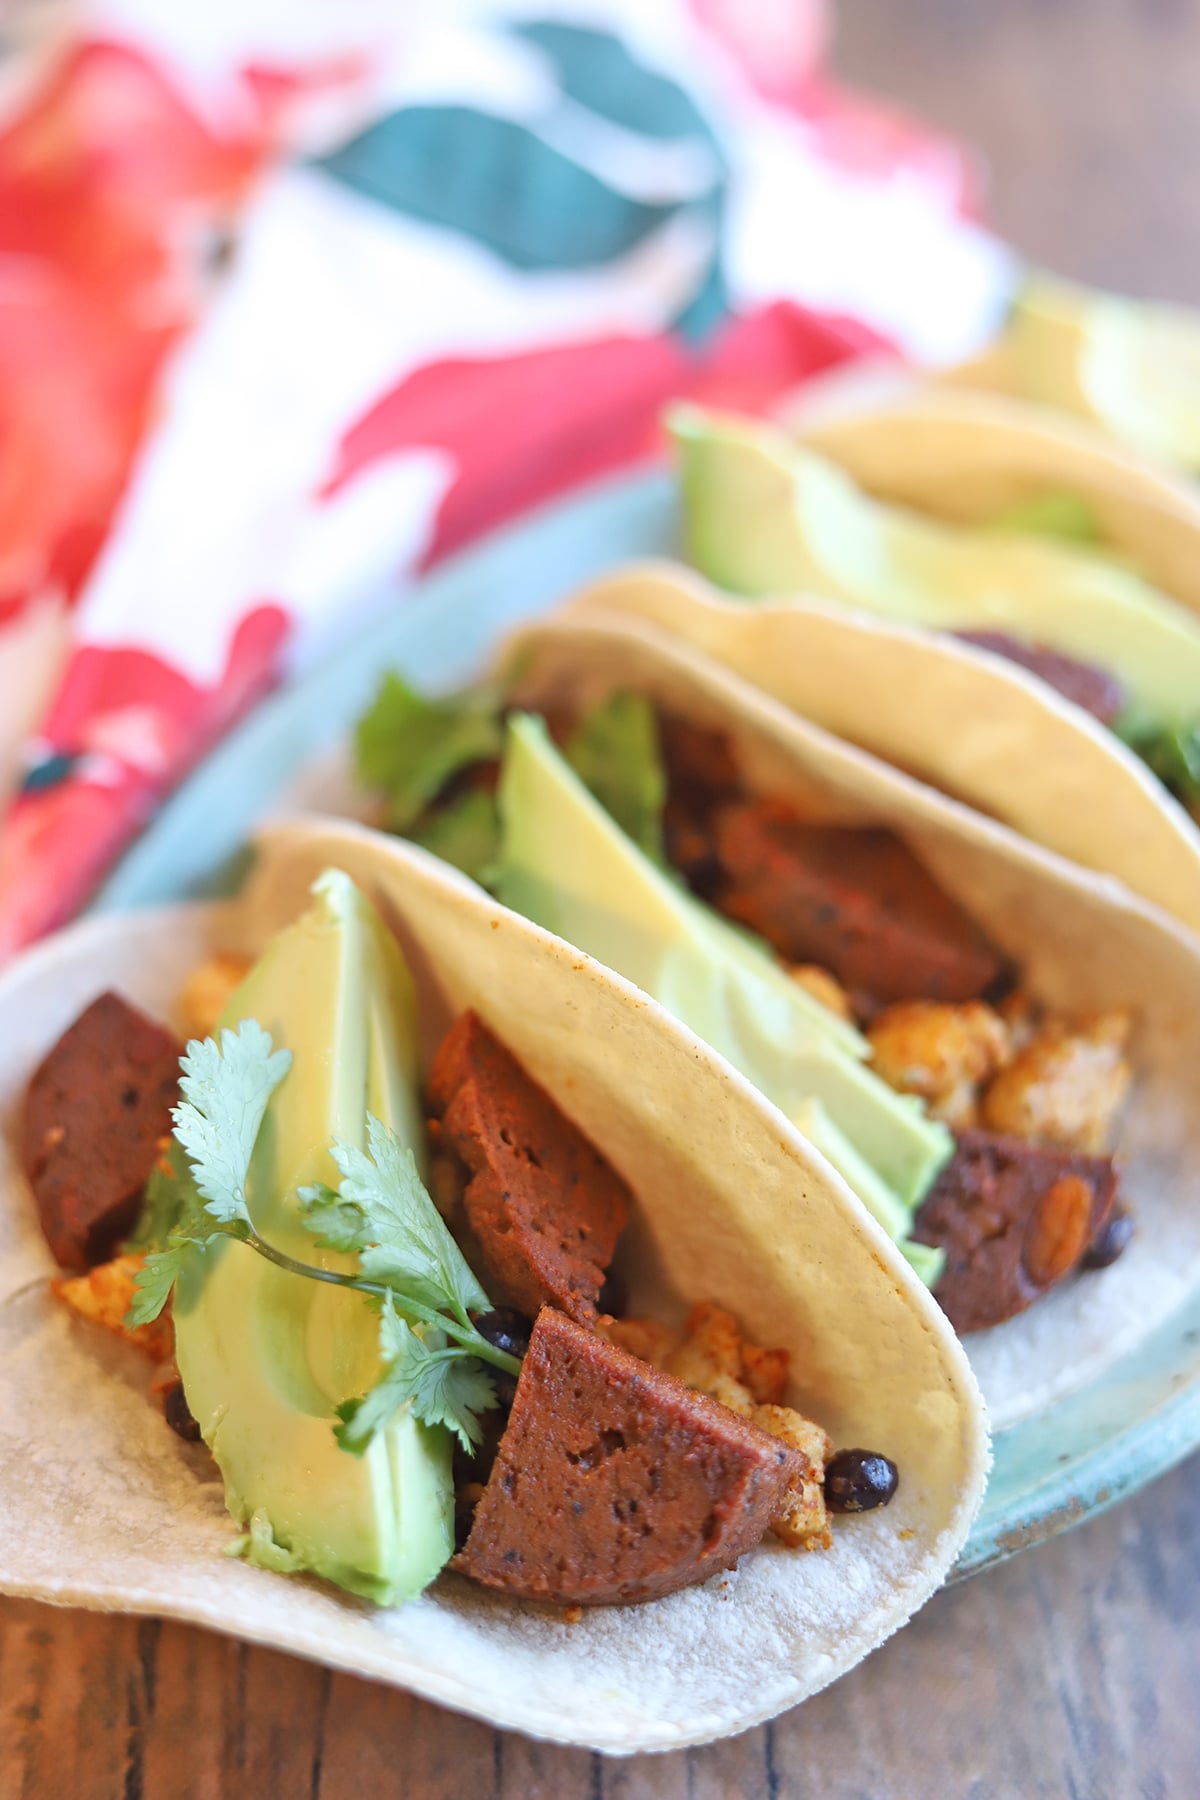 Breakfast tacos with Portuguese sausage.